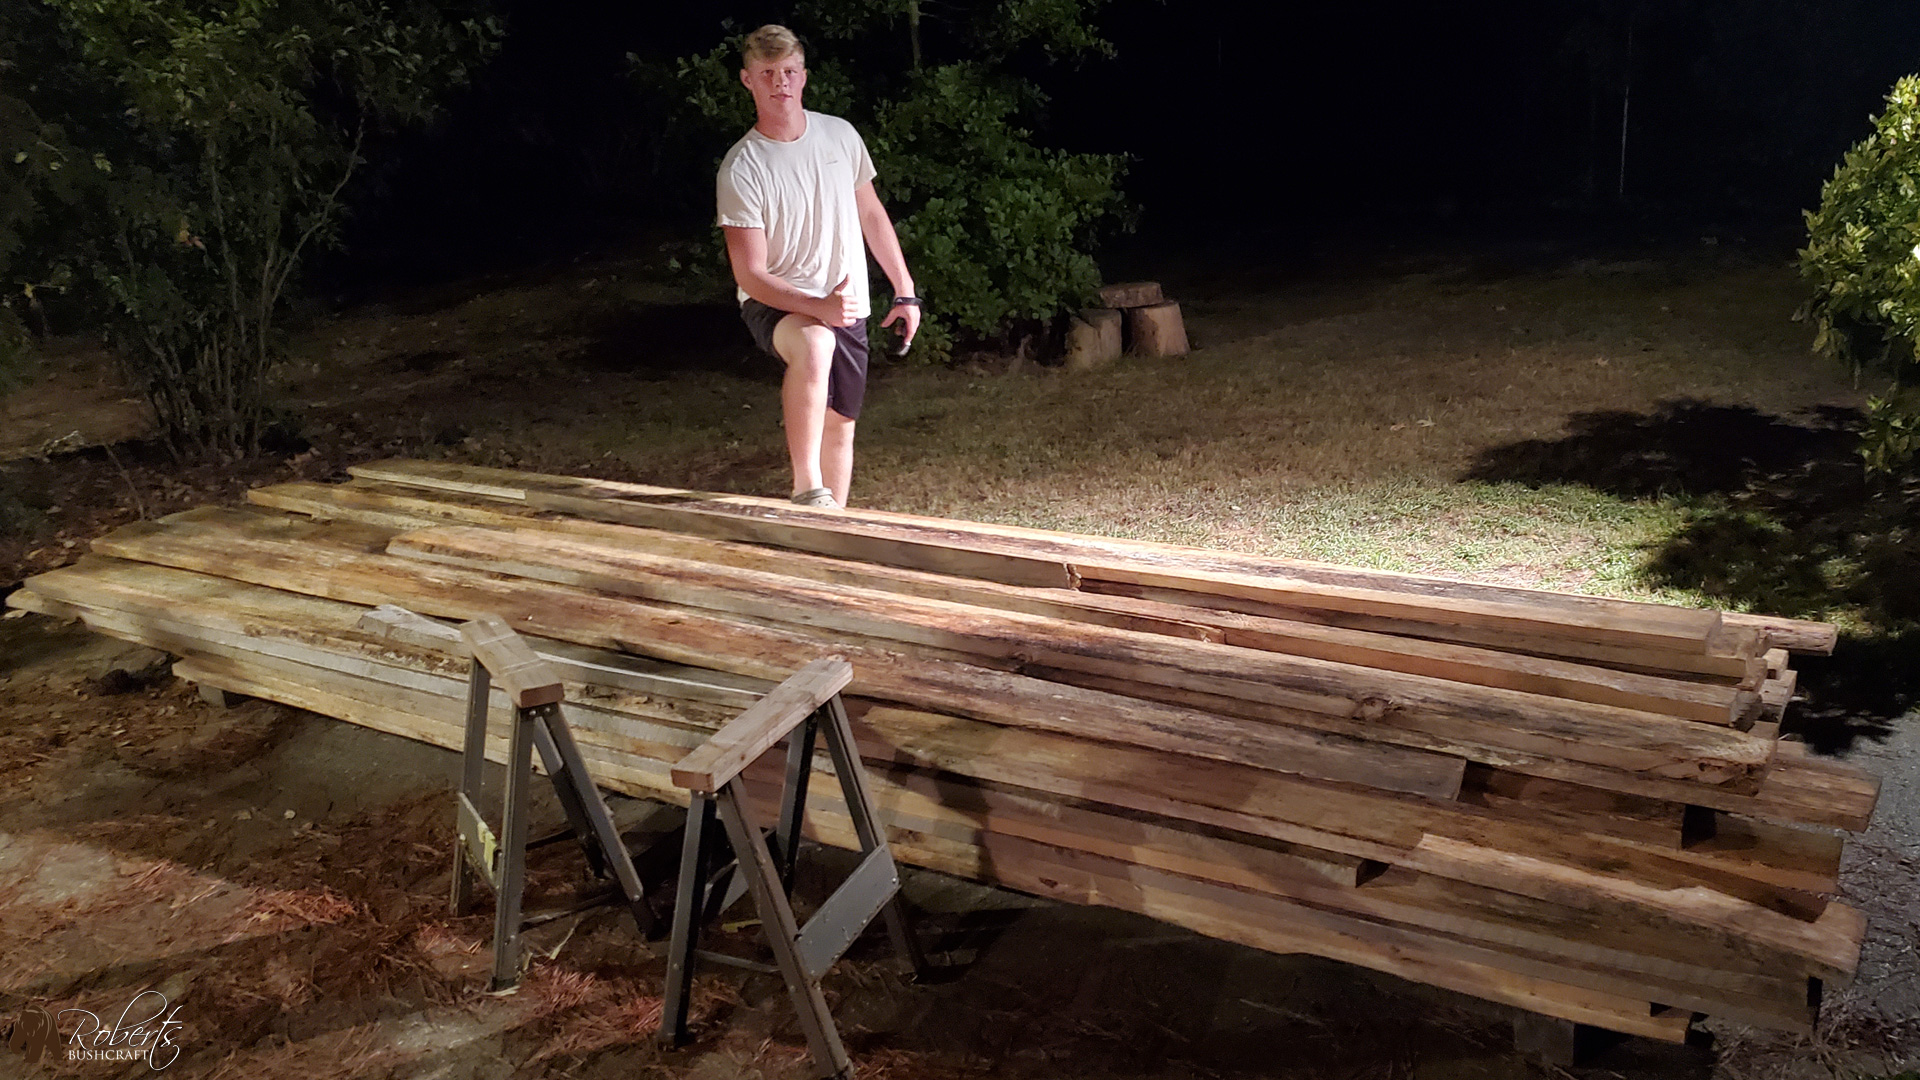 Standing proudly with a stack of pine lumber